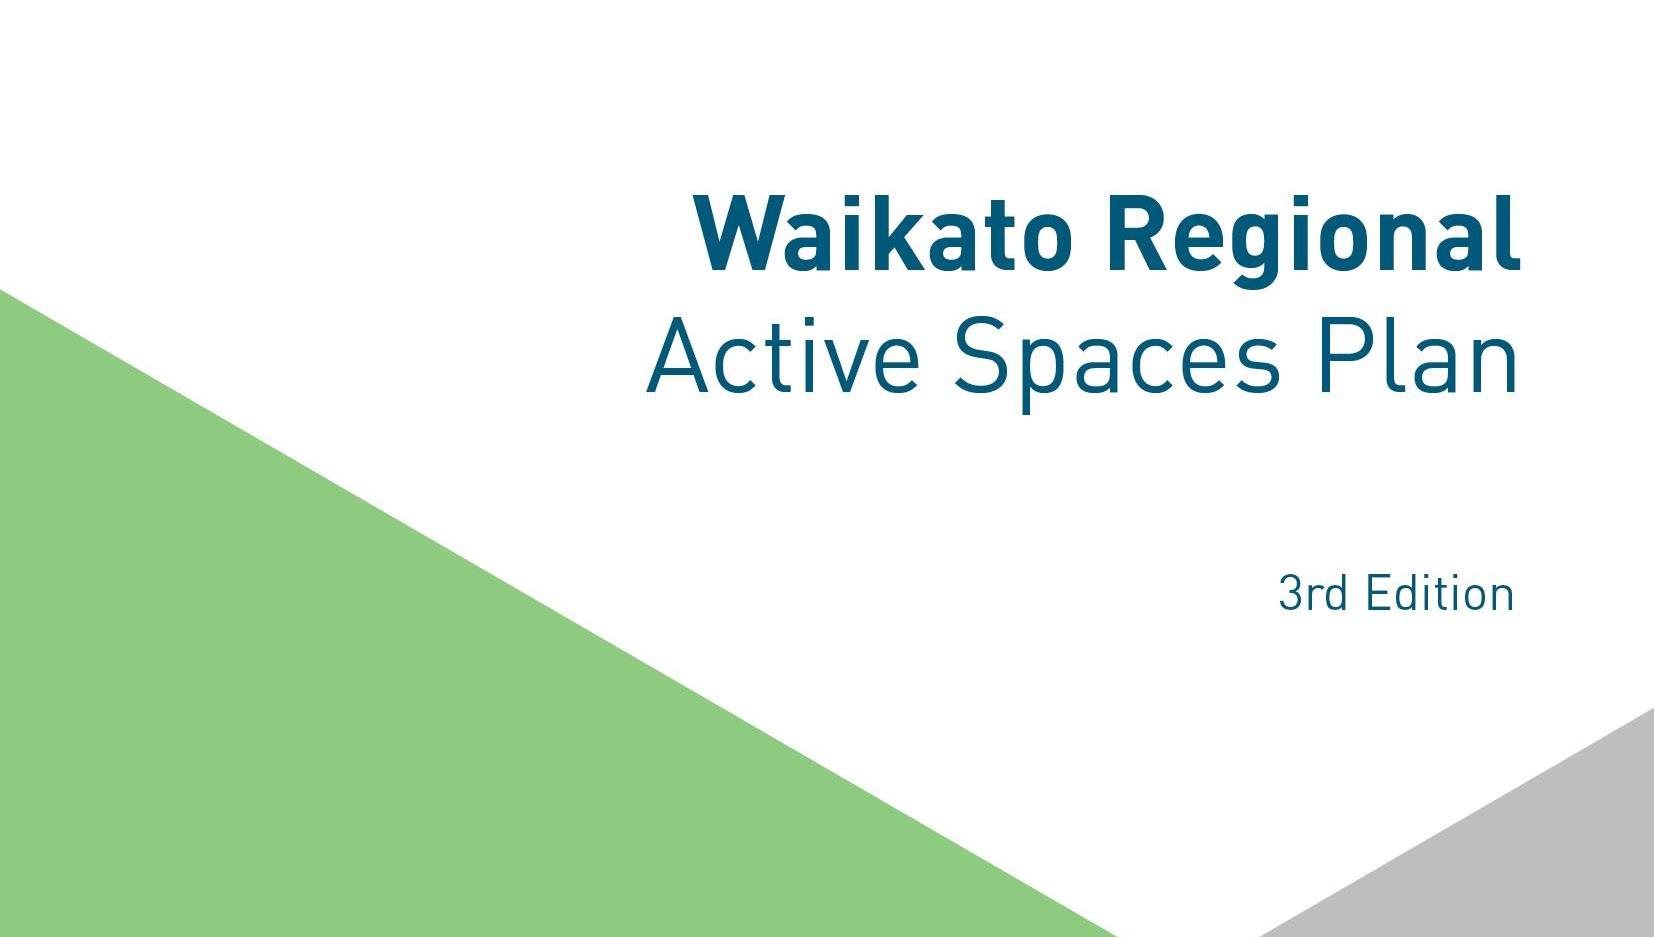 Waikato Regional Active Spaces Plan helps drive decision making in facilities, places and spaces